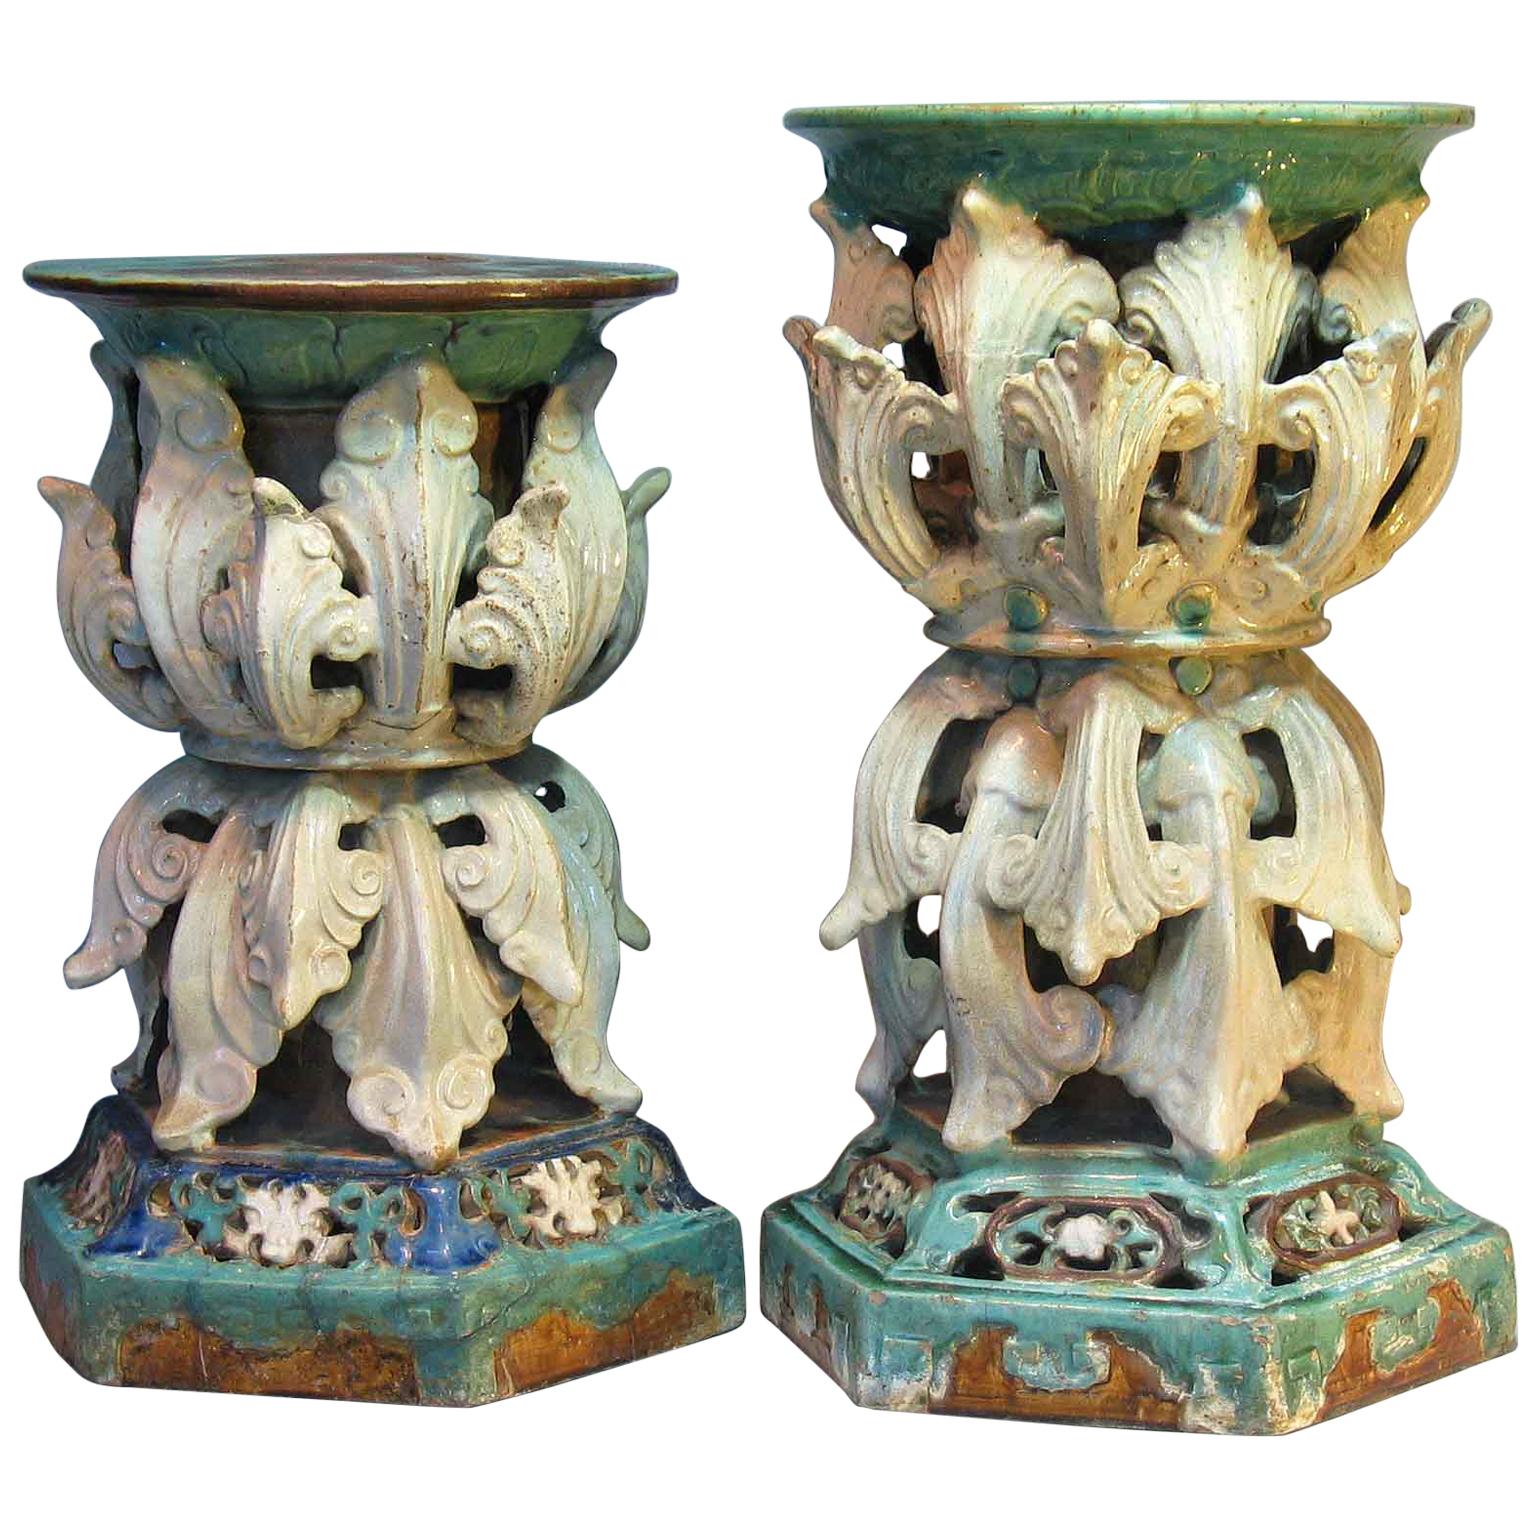 Two Very Decorative and Rare Massive Shiwan Pottery Stands, China, 19th Century